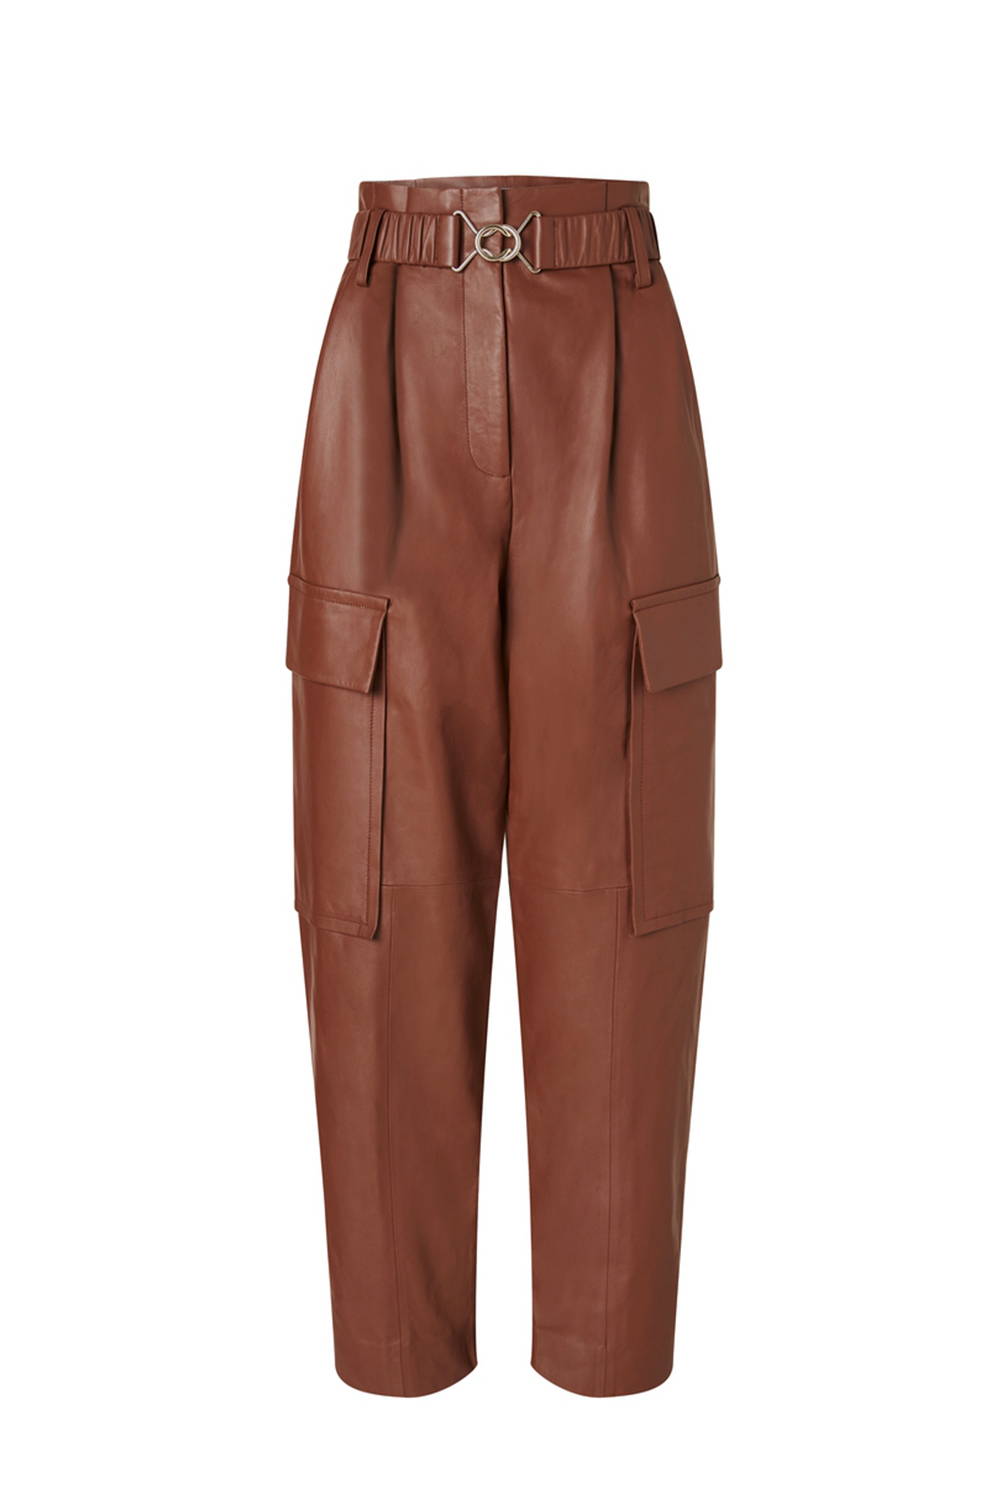 Oroton Leather Belted Paper Bag Pant Brown